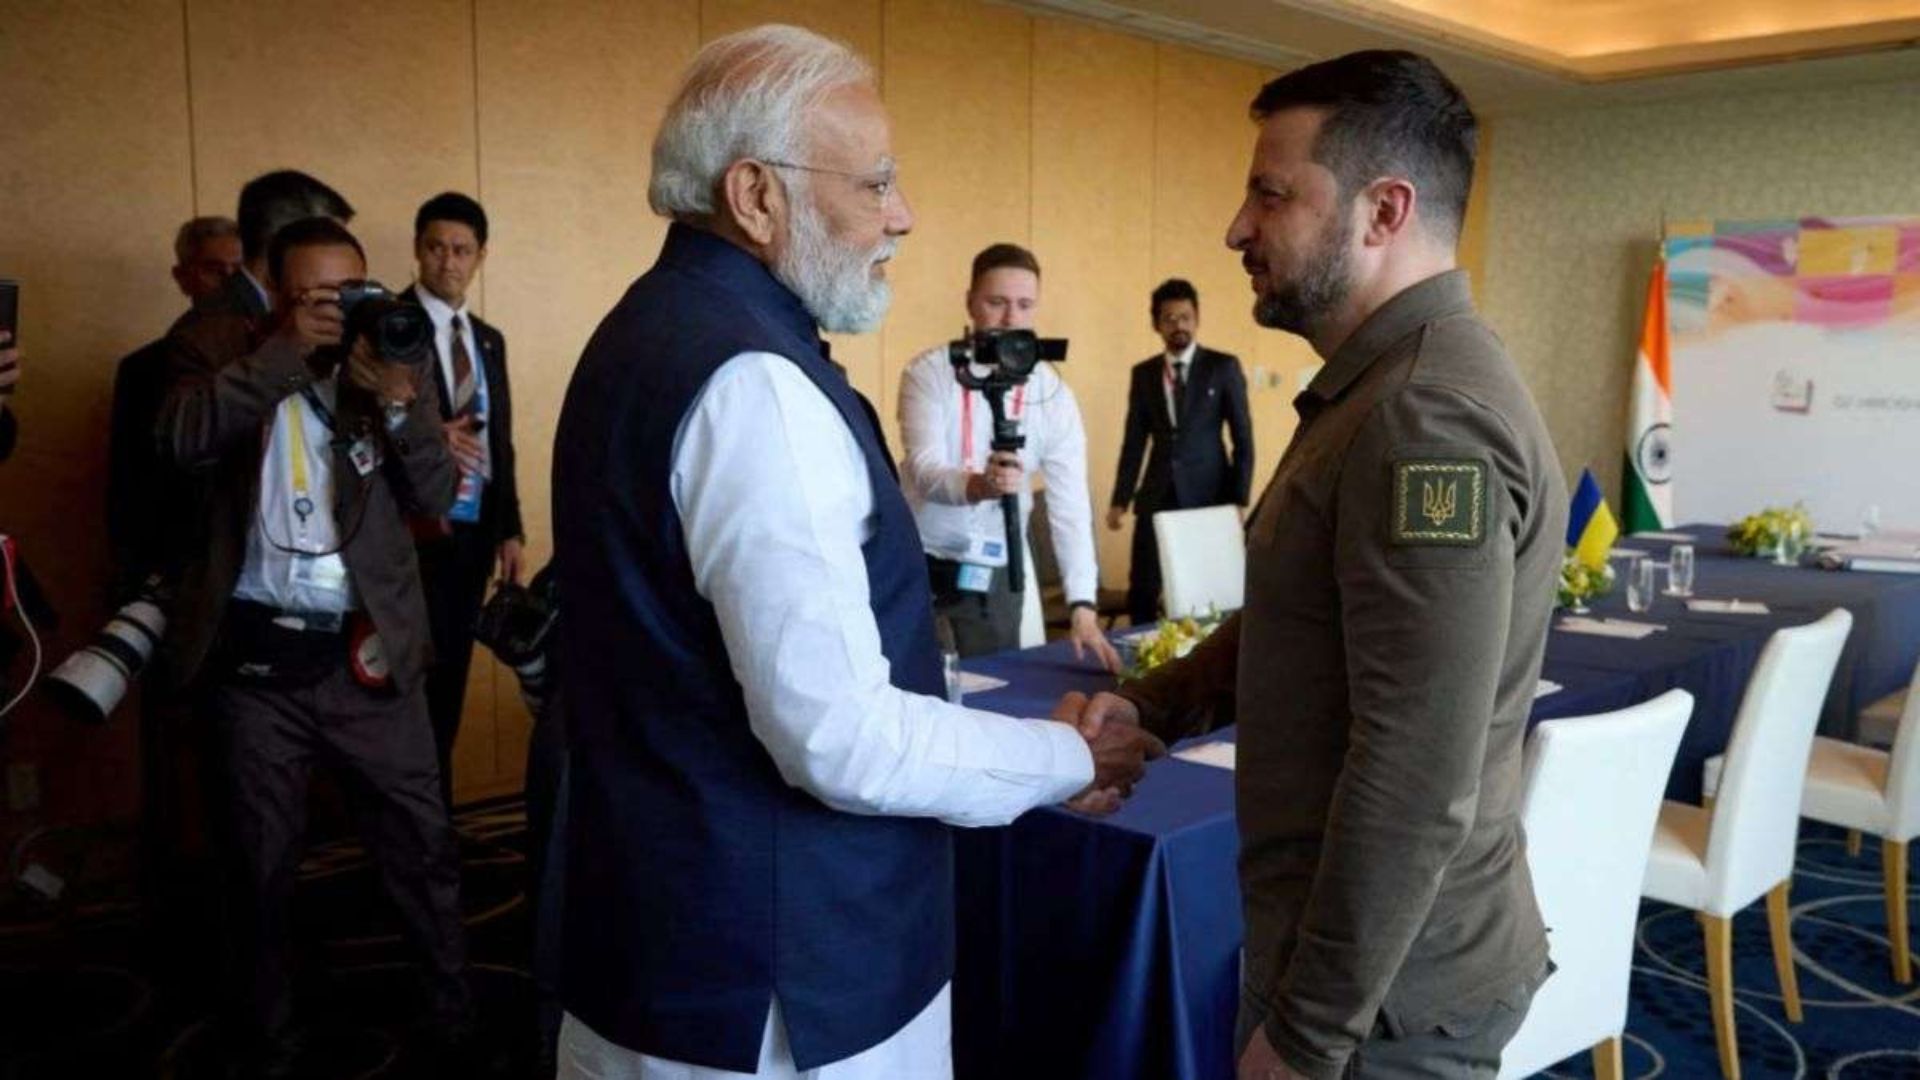 PM Modi Vows Humanitarian Support to Ukraine in Call with Zelenskyy